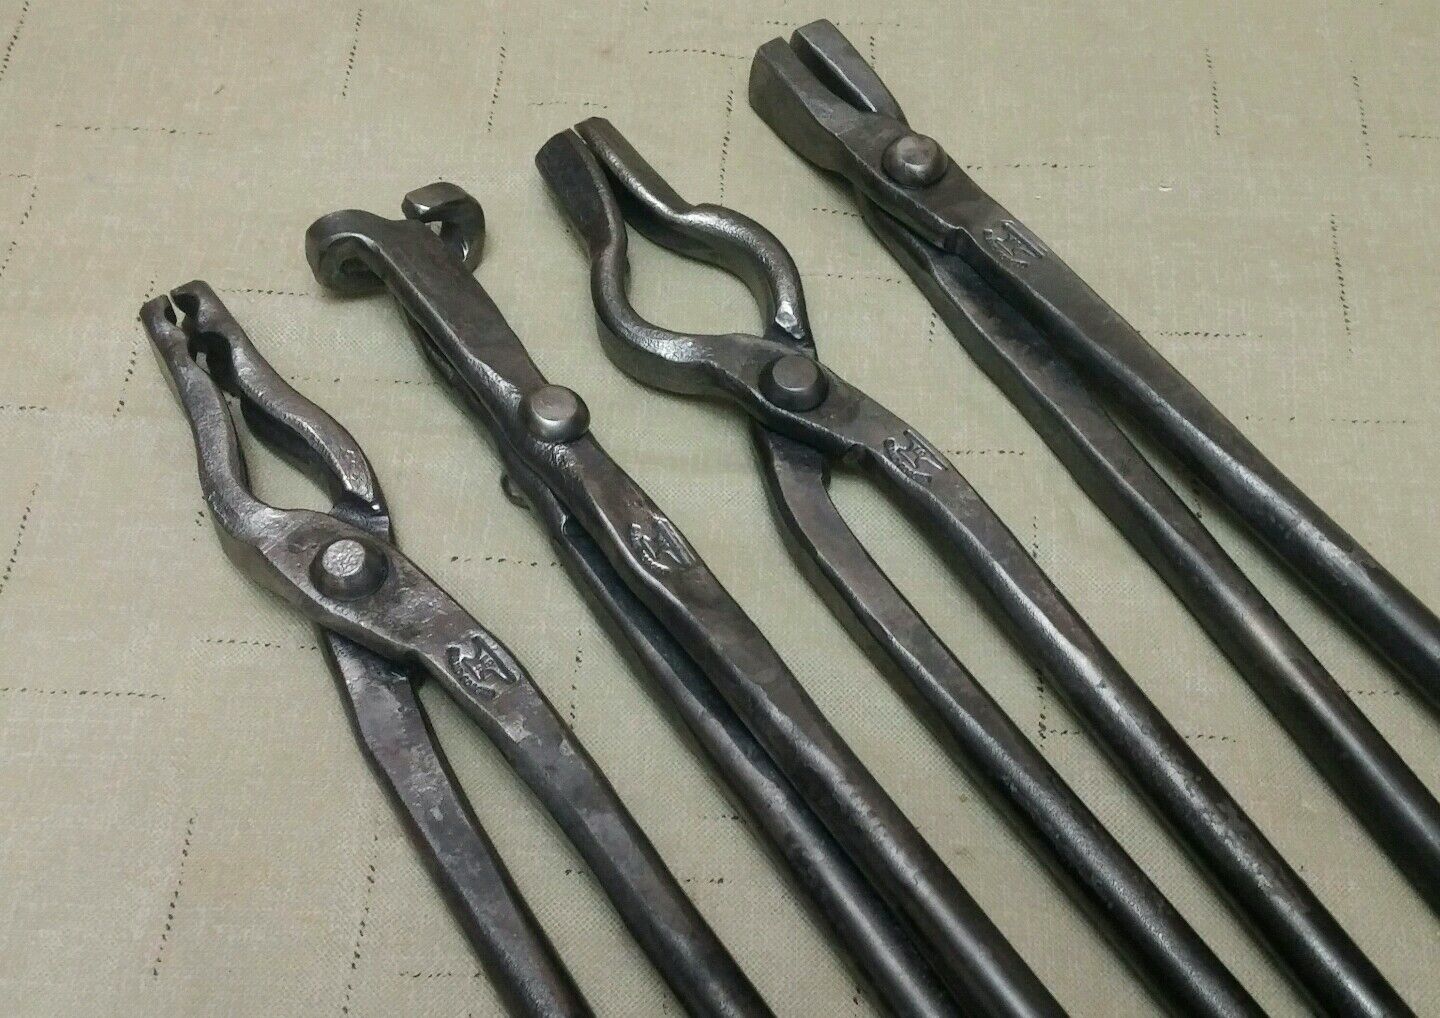 Blacksmith Tongs Set for forge anvil hammer knifemaking and vise tools 